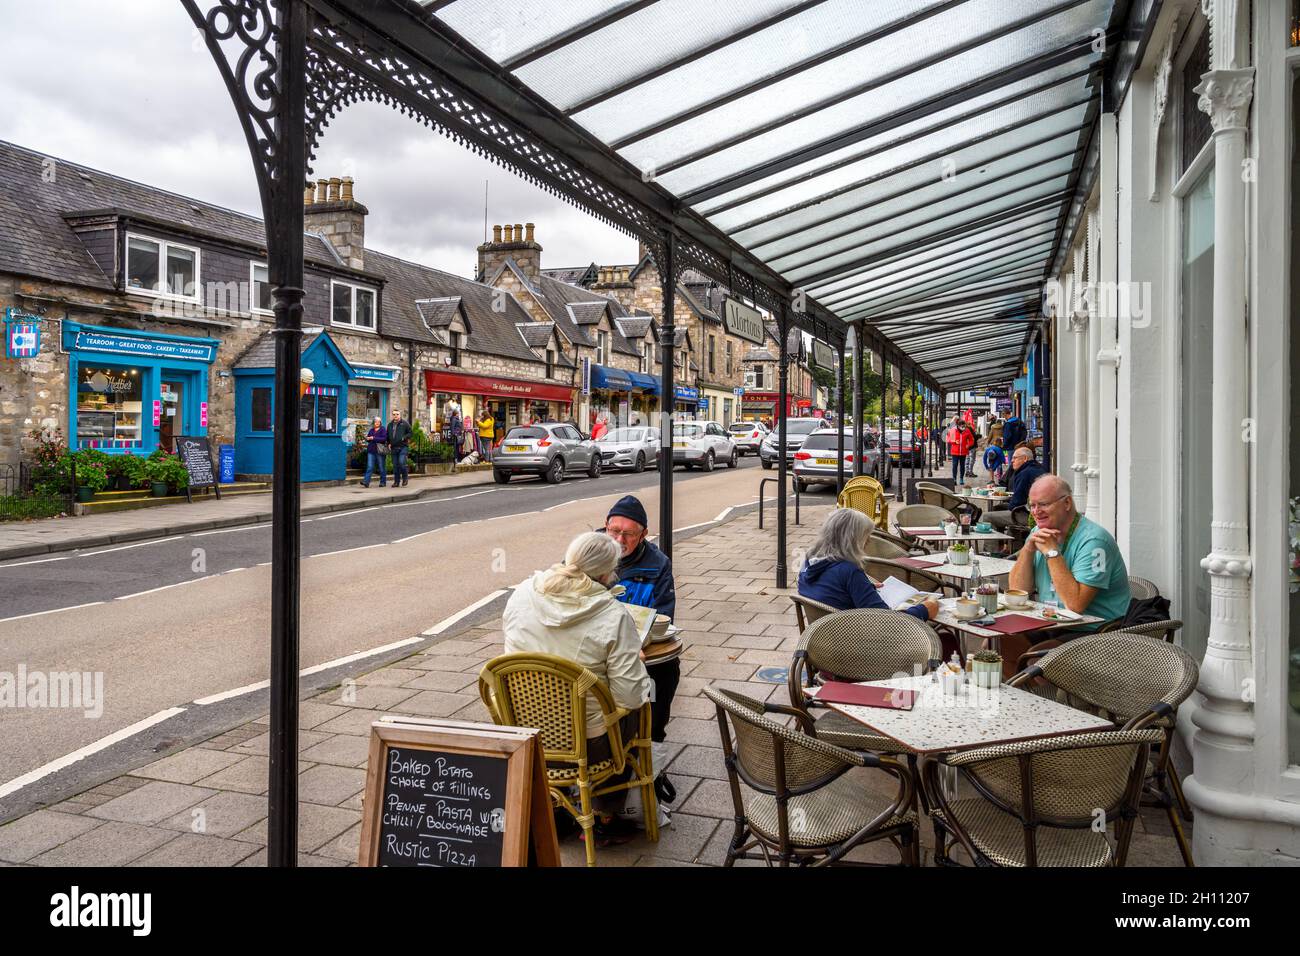 Cafe on the High Street (Atholl Road), Pitlochry, Scozia, Regno Unito Foto Stock